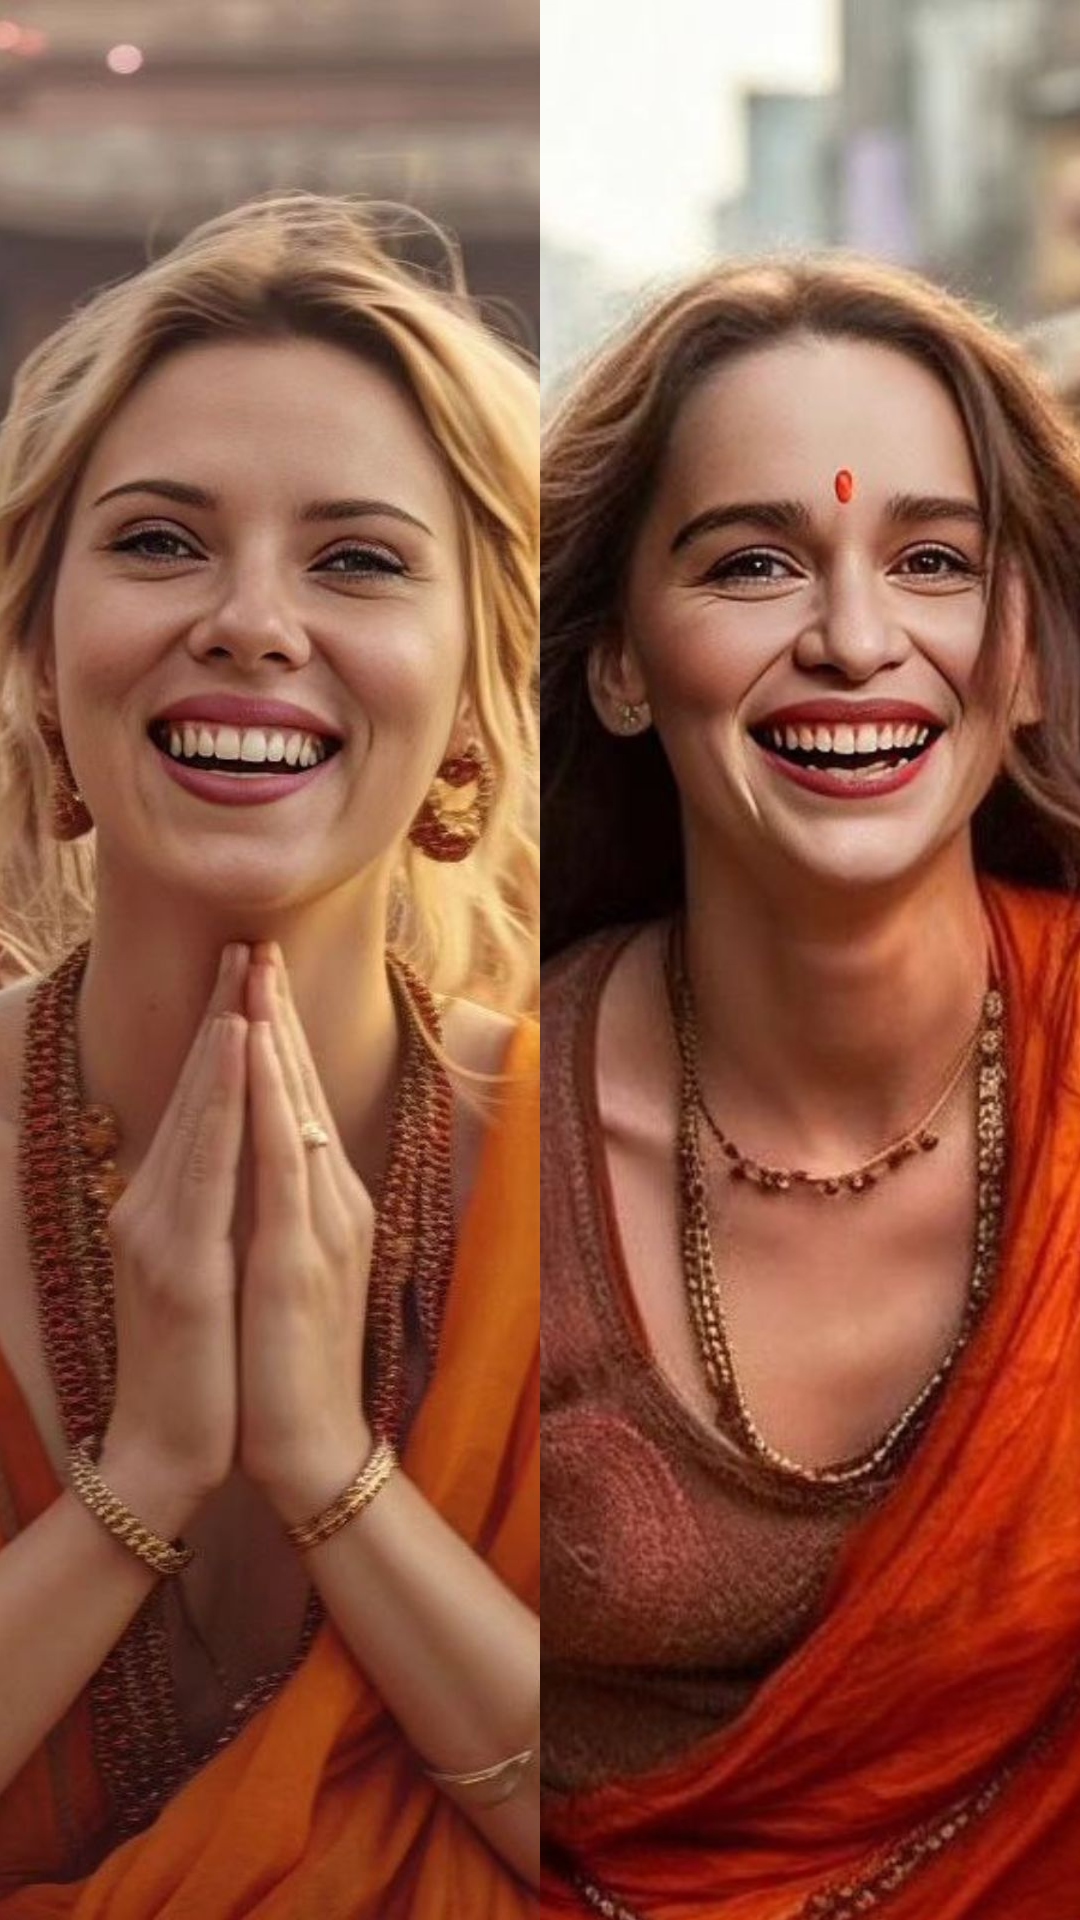 AI Pics Show Hollywood Actresses On 'Eat Pray Love' Style Spiritual Journey In India